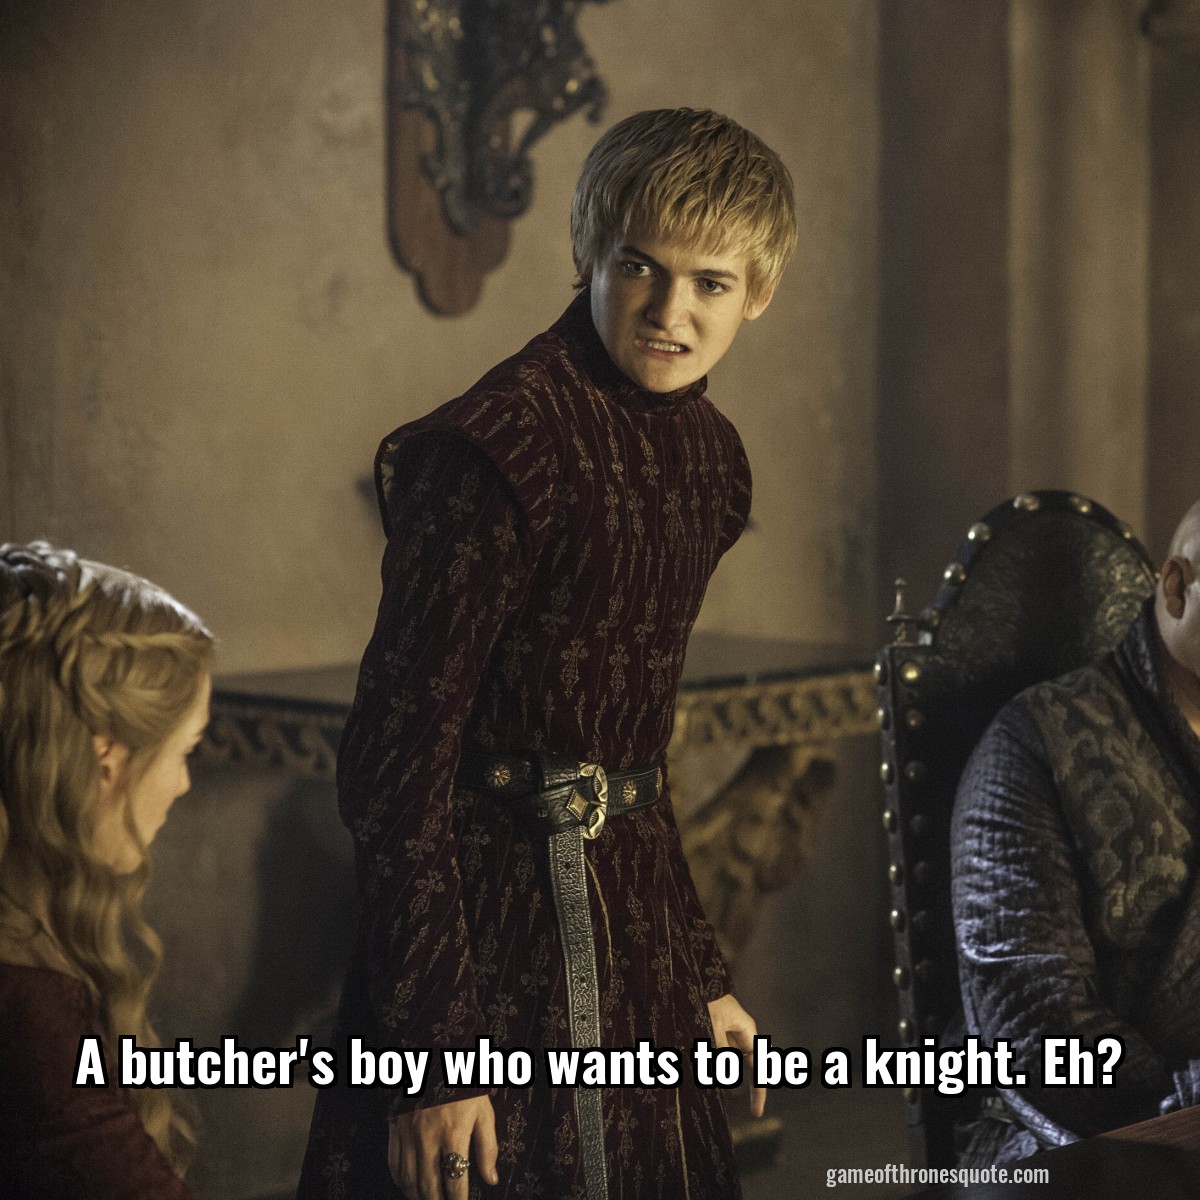 A butcher's boy who wants to be a knight. Eh?